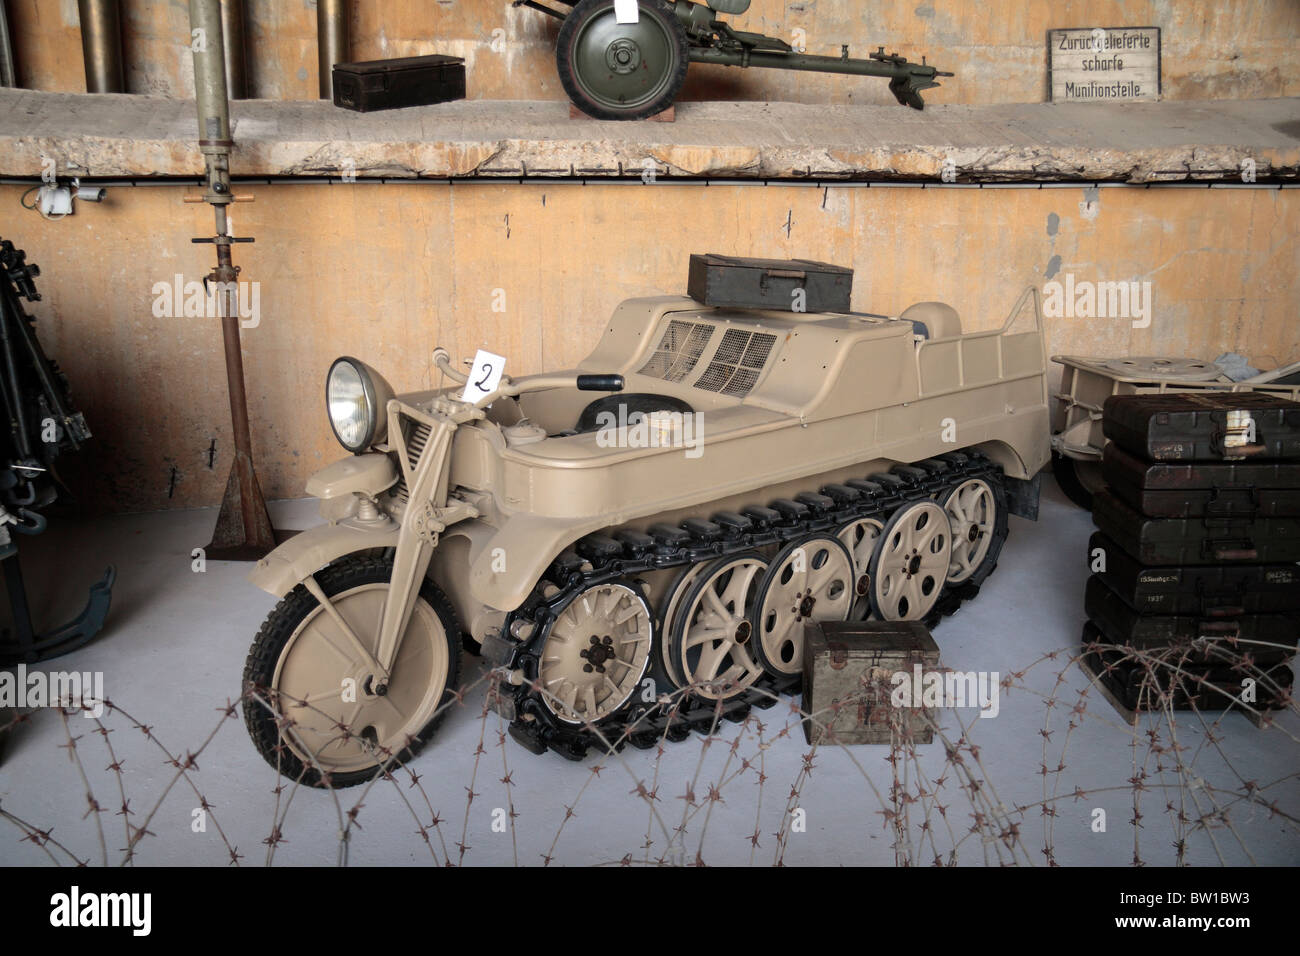 A German World War Two Kettenkrad motorbike on display at the Batterie Todt Museum, Audinghen at Cap Gris Nez, France. Stock Photo